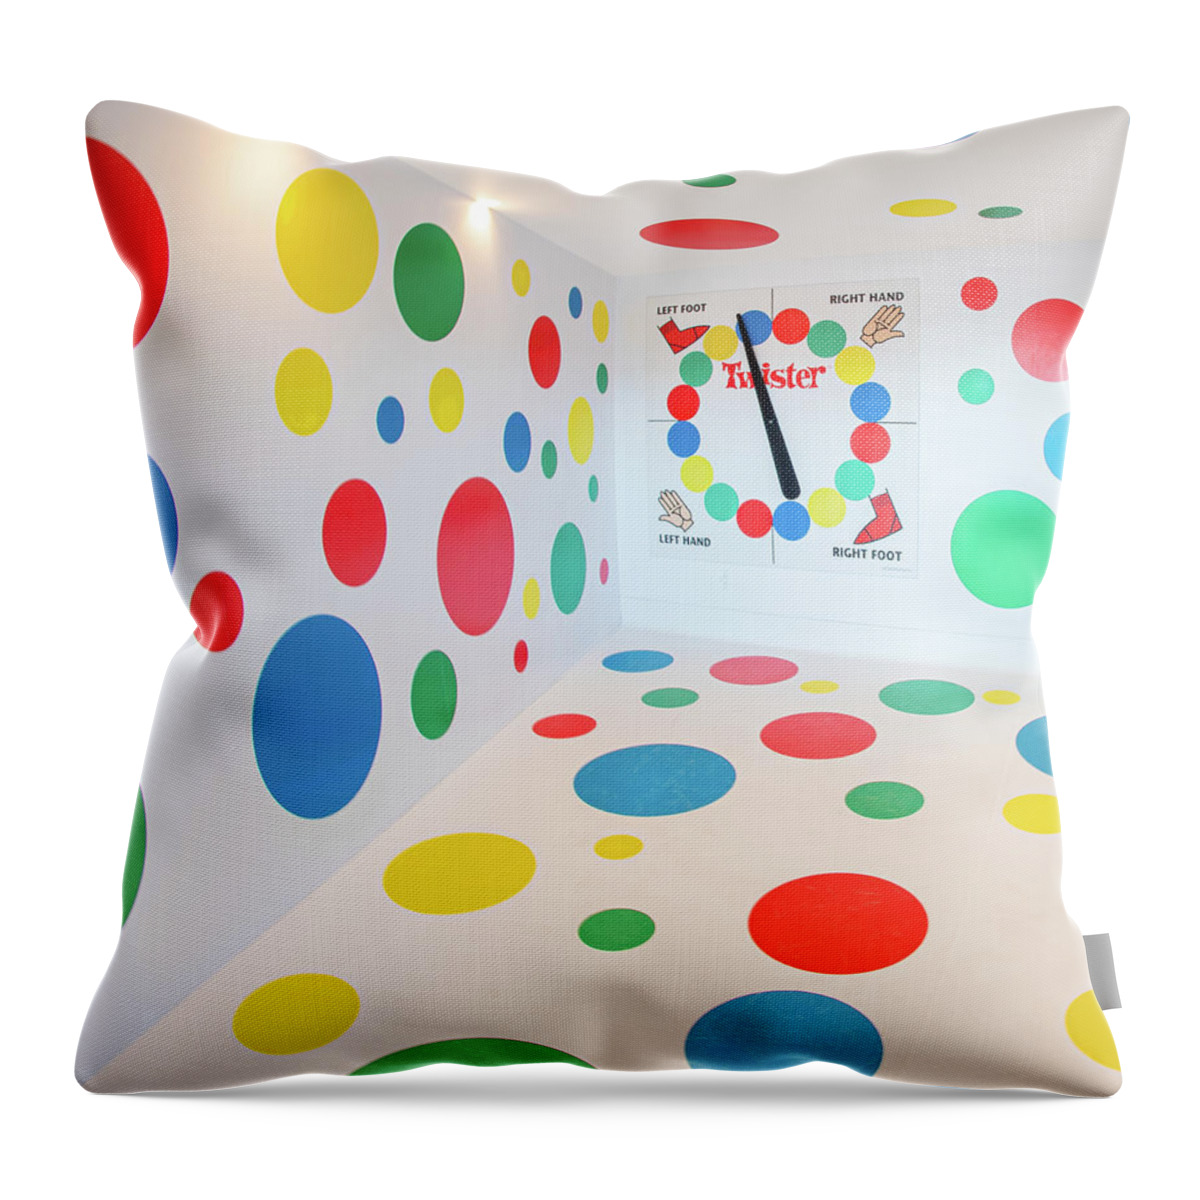 Right Hand Red Throw Pillow featuring the photograph Twister by Sylvia Goldkranz